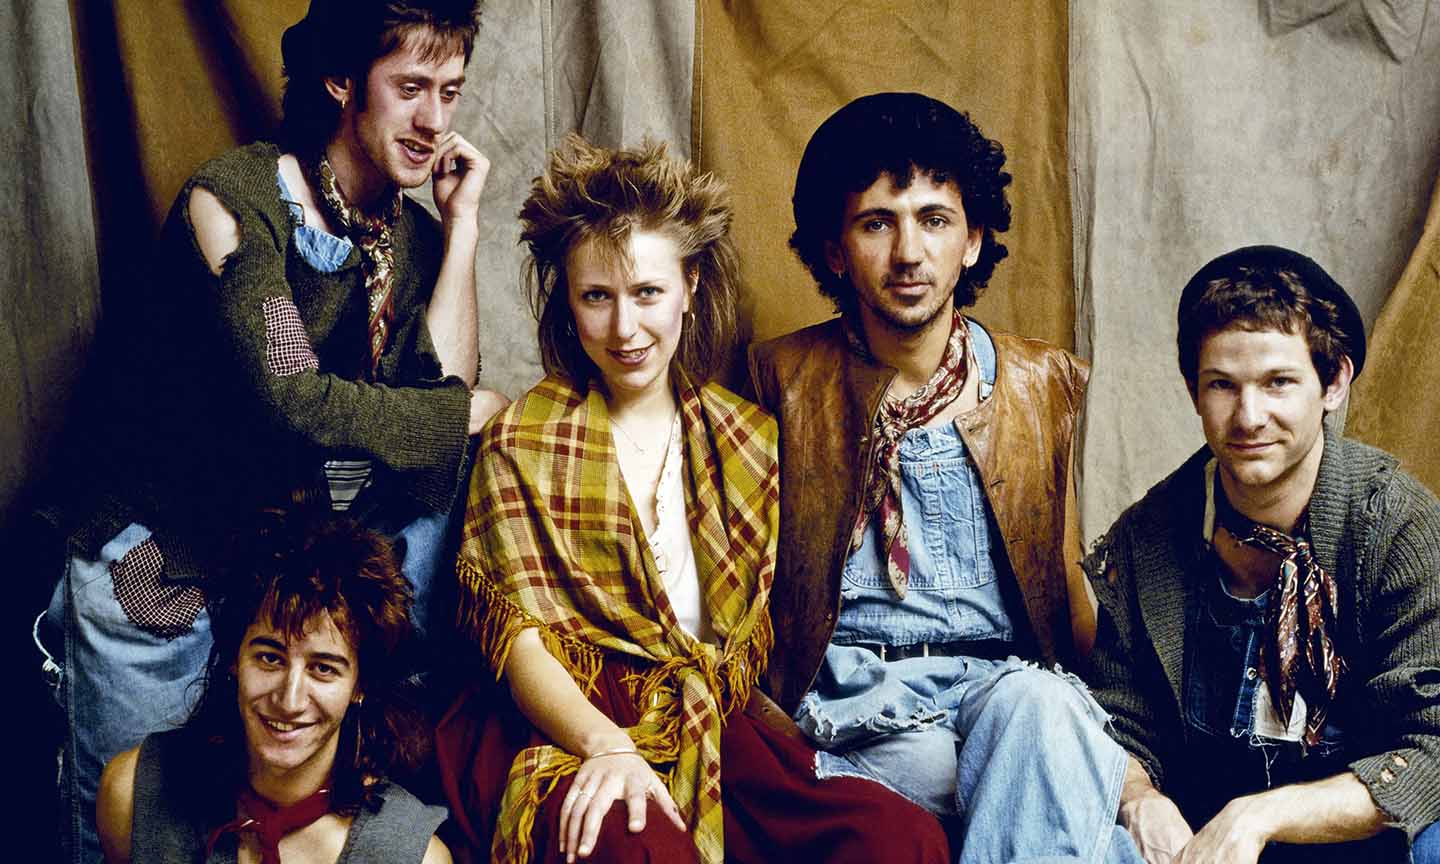 Come On Eileen': The Story Behind Dexys Midnight Runners' Hit